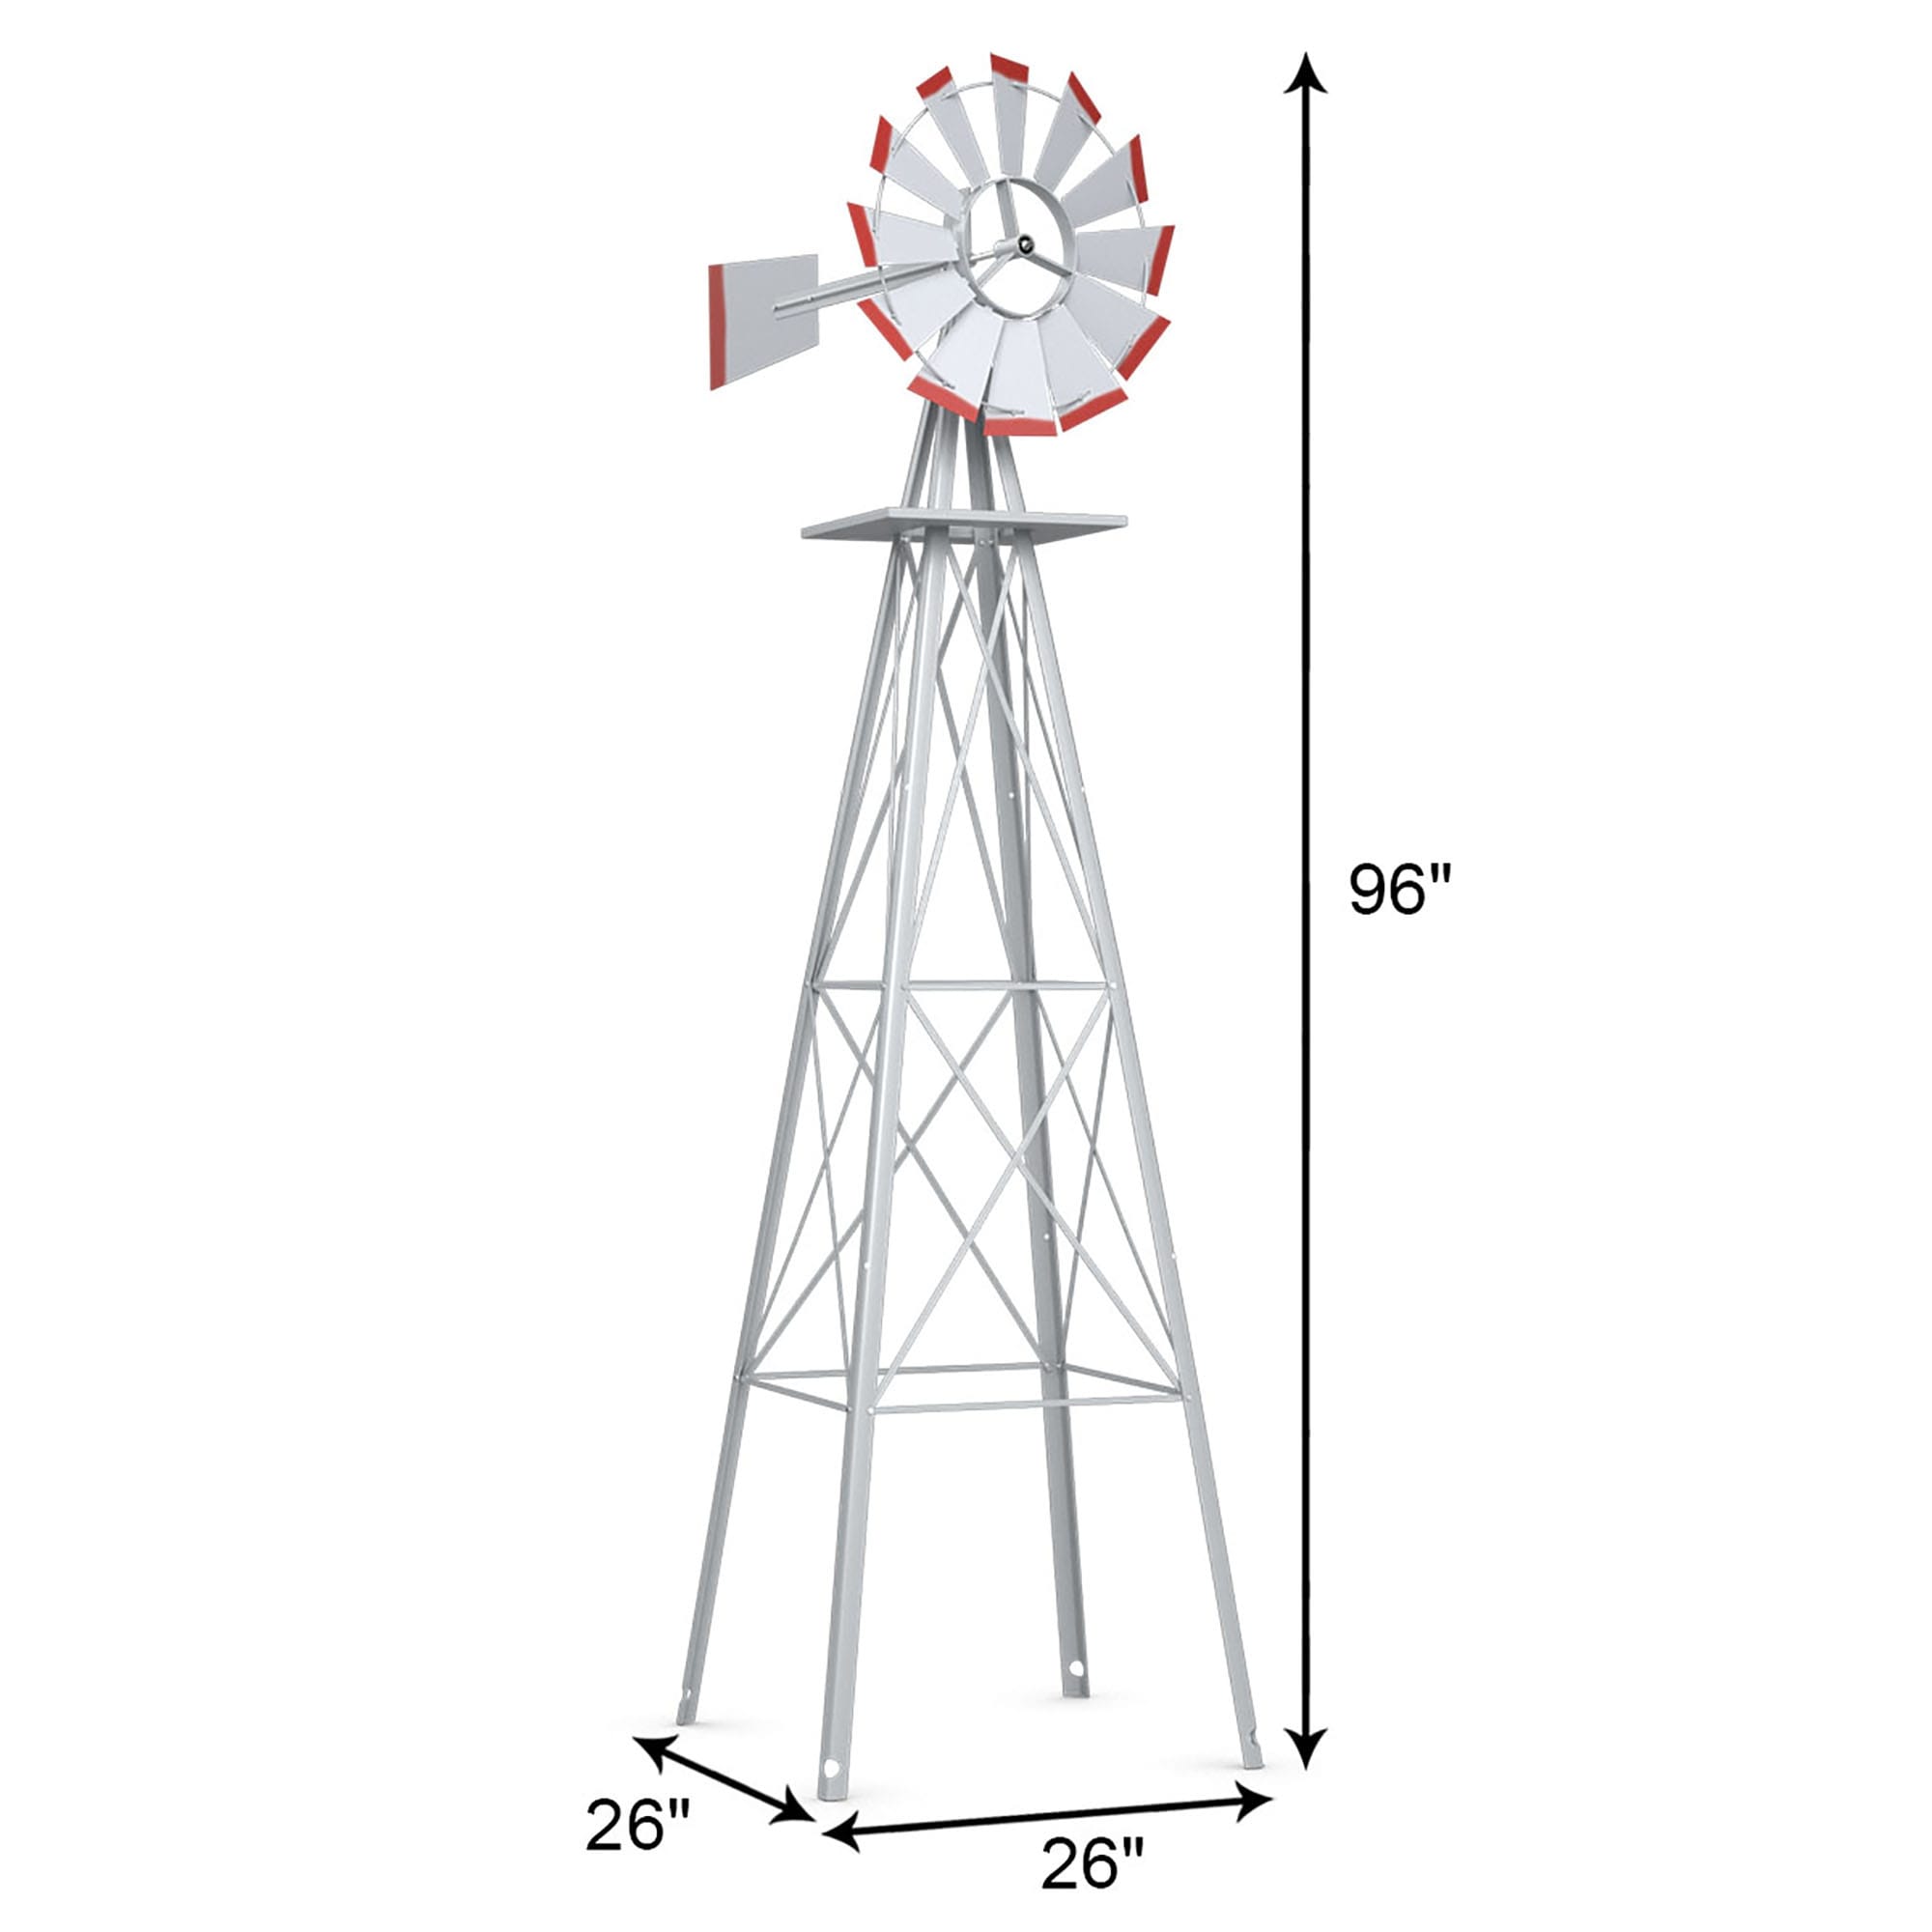 Gray sunseen 8FT Windmill Decor Outdoor Ornamental Wind Sculptures Spinners Metal Wind Mill Decoration Weather Vane Weather Resistant for Garden Yard Lawn Farm 